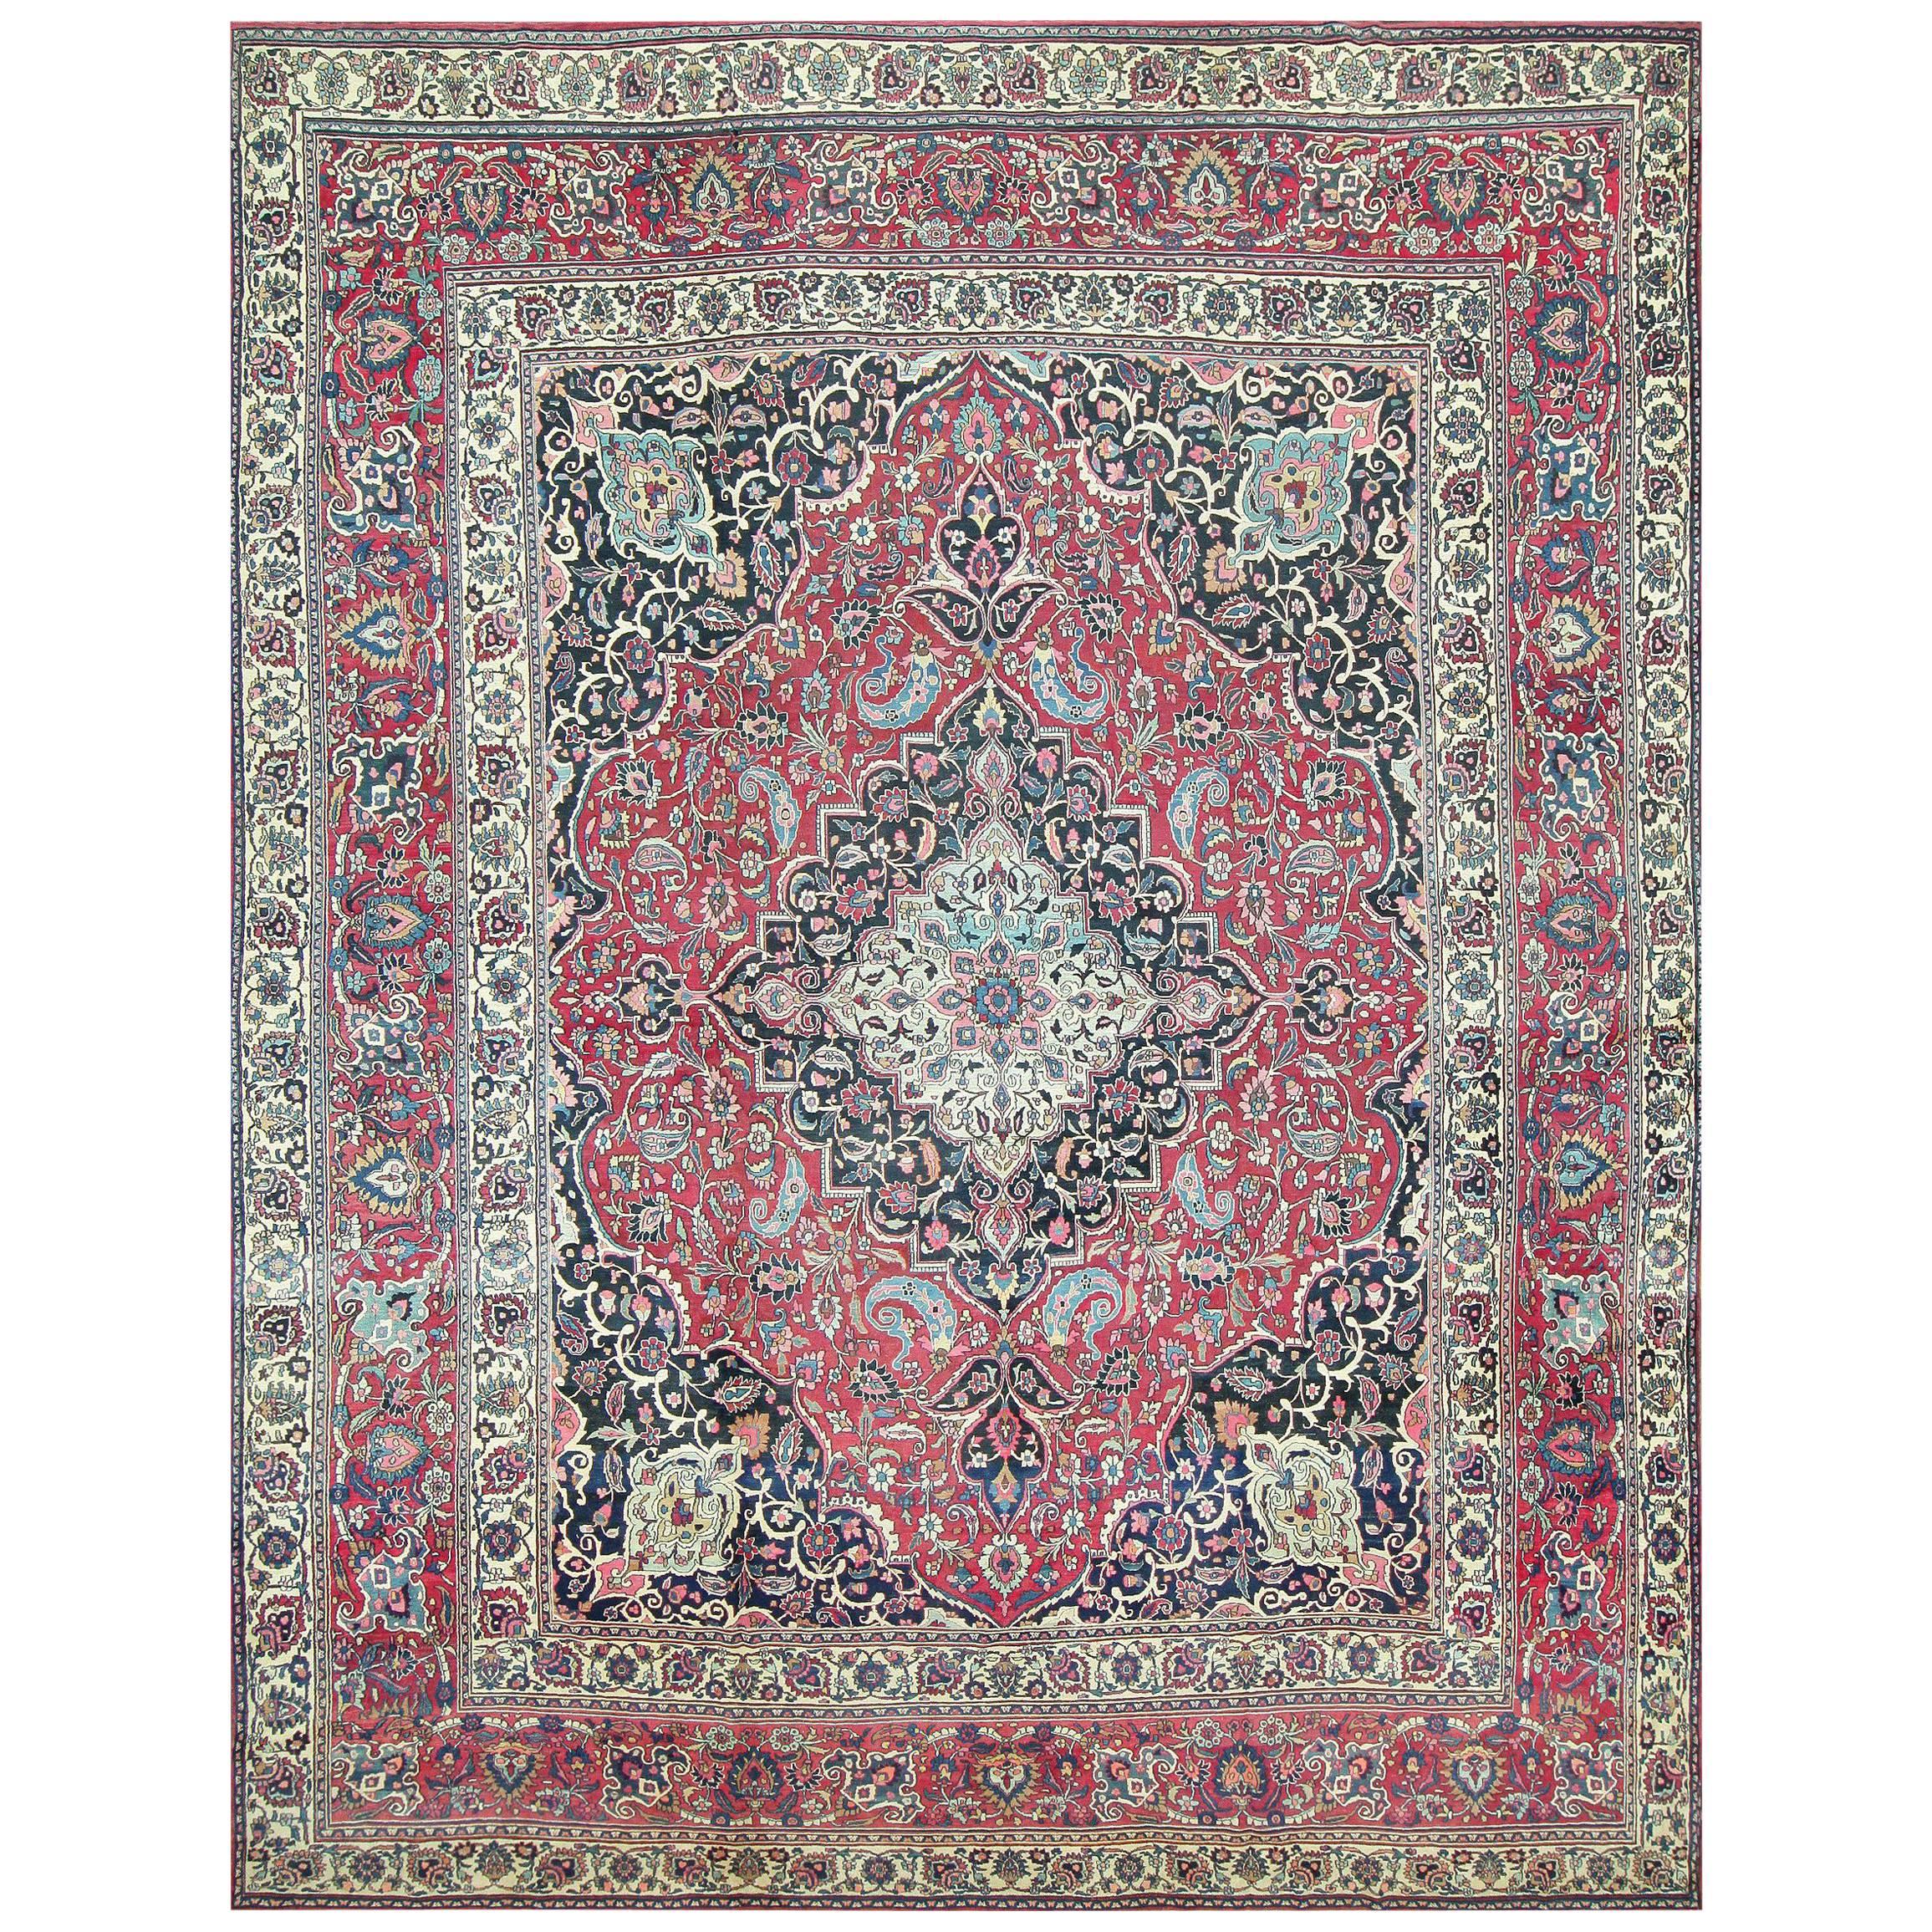 Oversized Fine Antique Persian Khorassan Mashad Rug. Size: 15 ft 6 in x 20 ft 